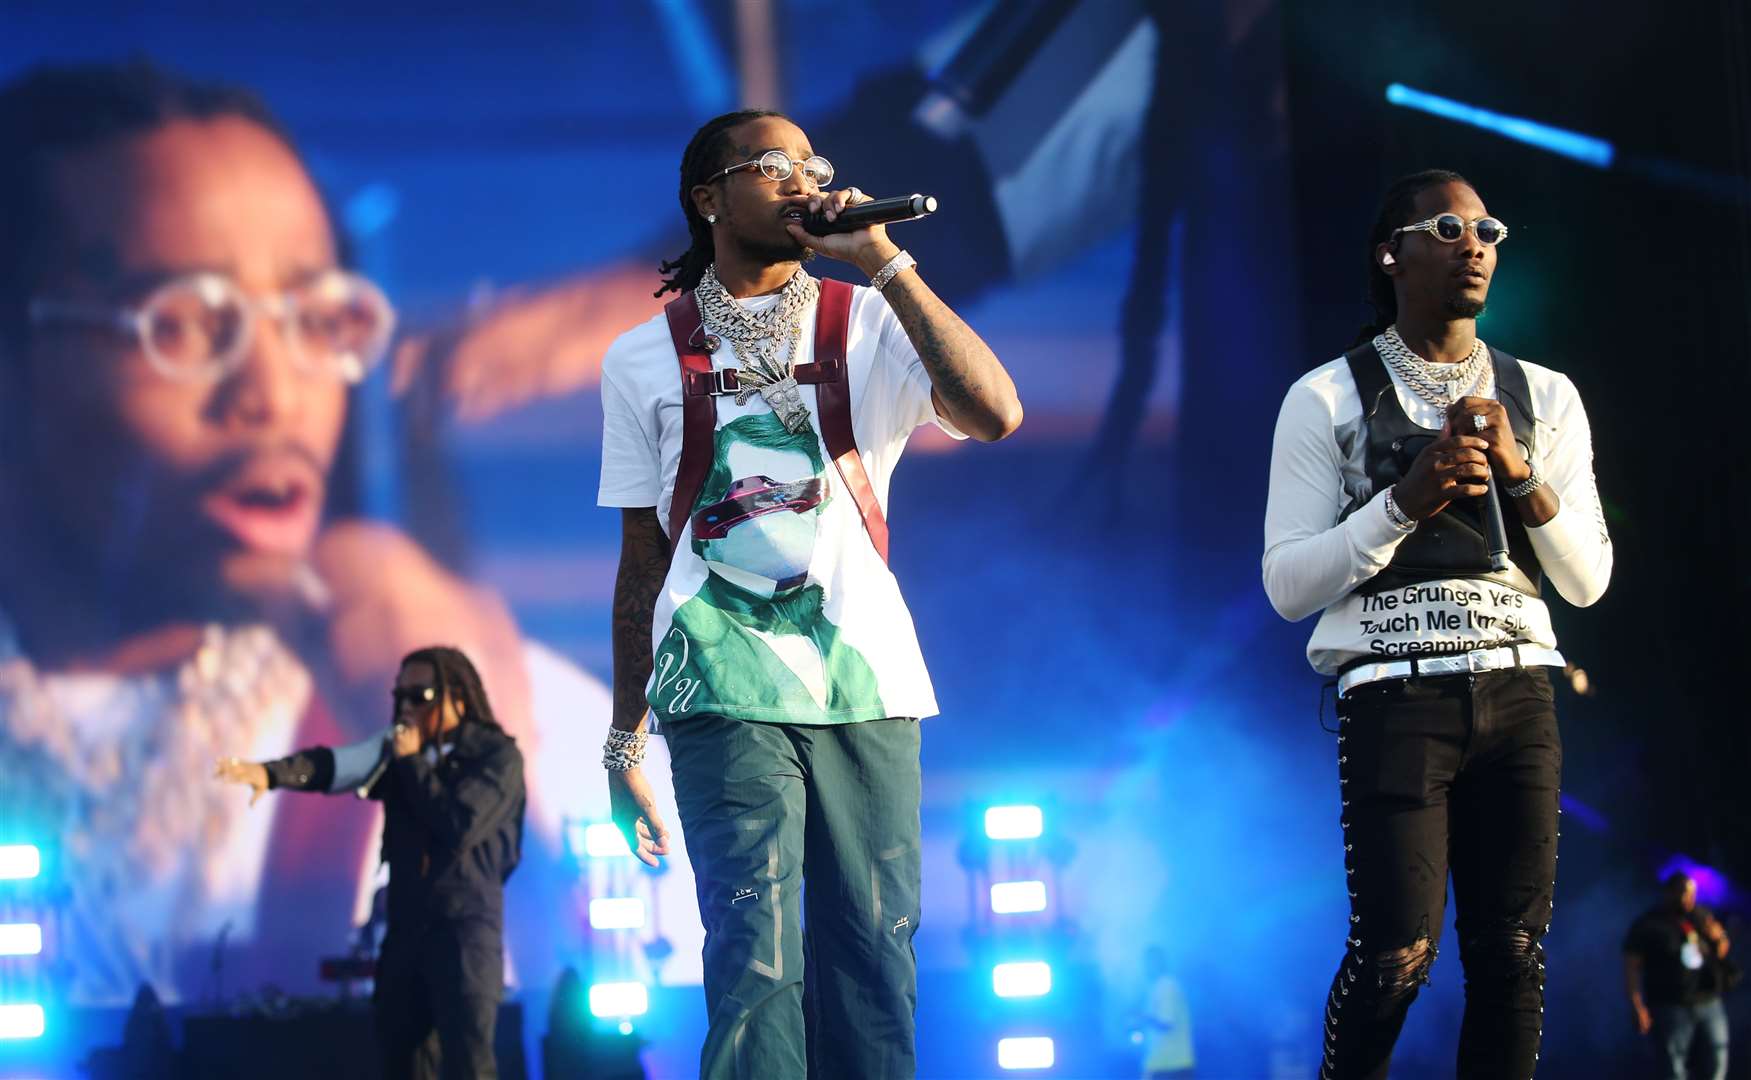 Takeoff, Quavo and Offset perform at Wireless Festival held at Finsbury Park, London (Isabel Infantes/PA)